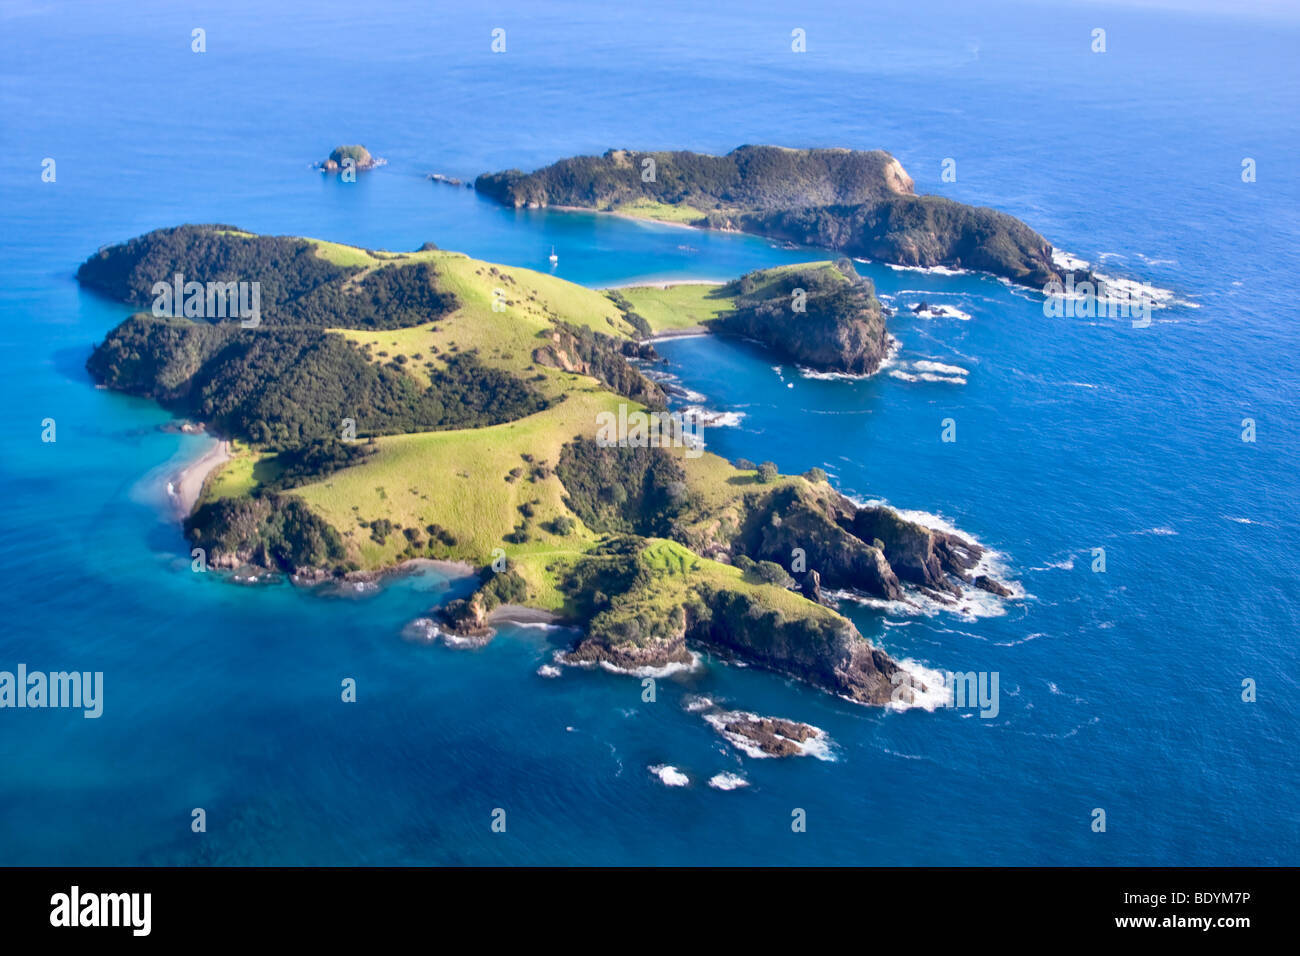 Aerial view of the Bay of Islands, Northland, New Zealand. Stock Photo